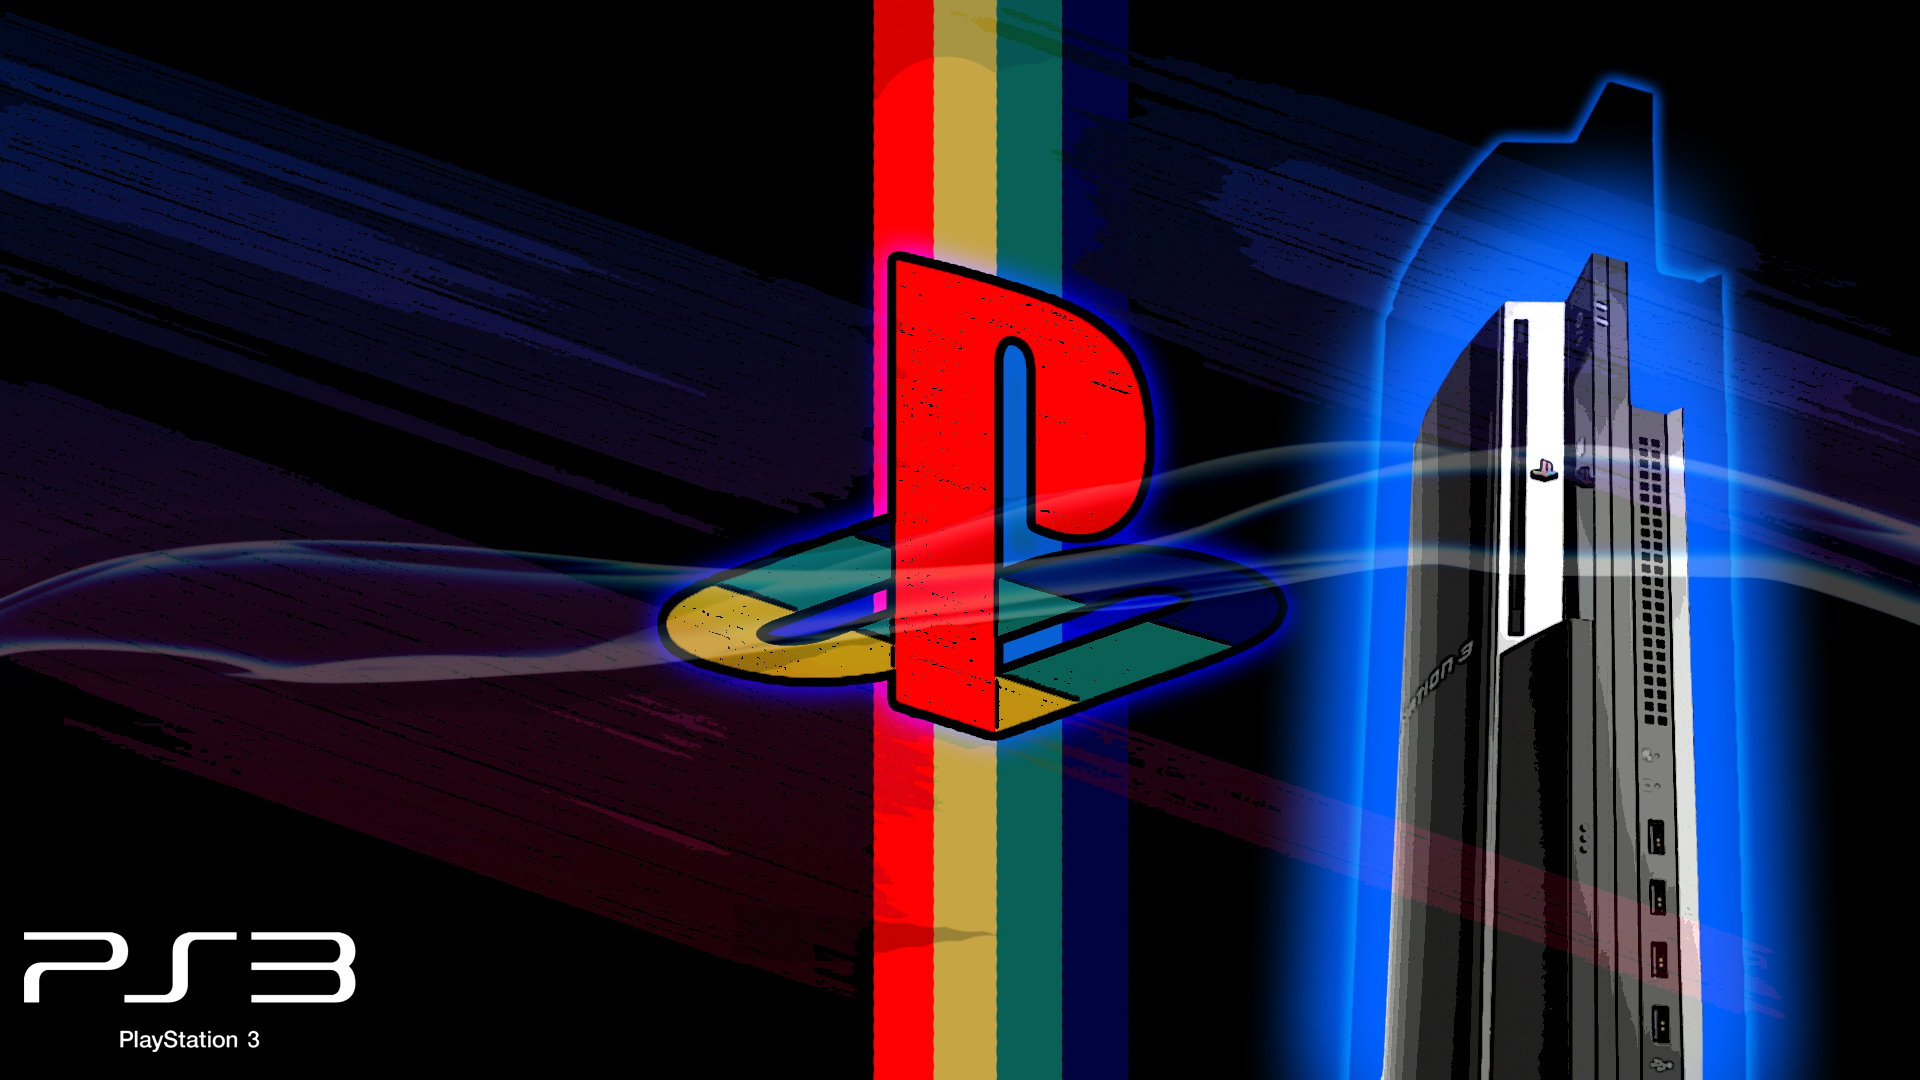 Free download playstation 3 logo wallpaperPS Logo and PS3 ...